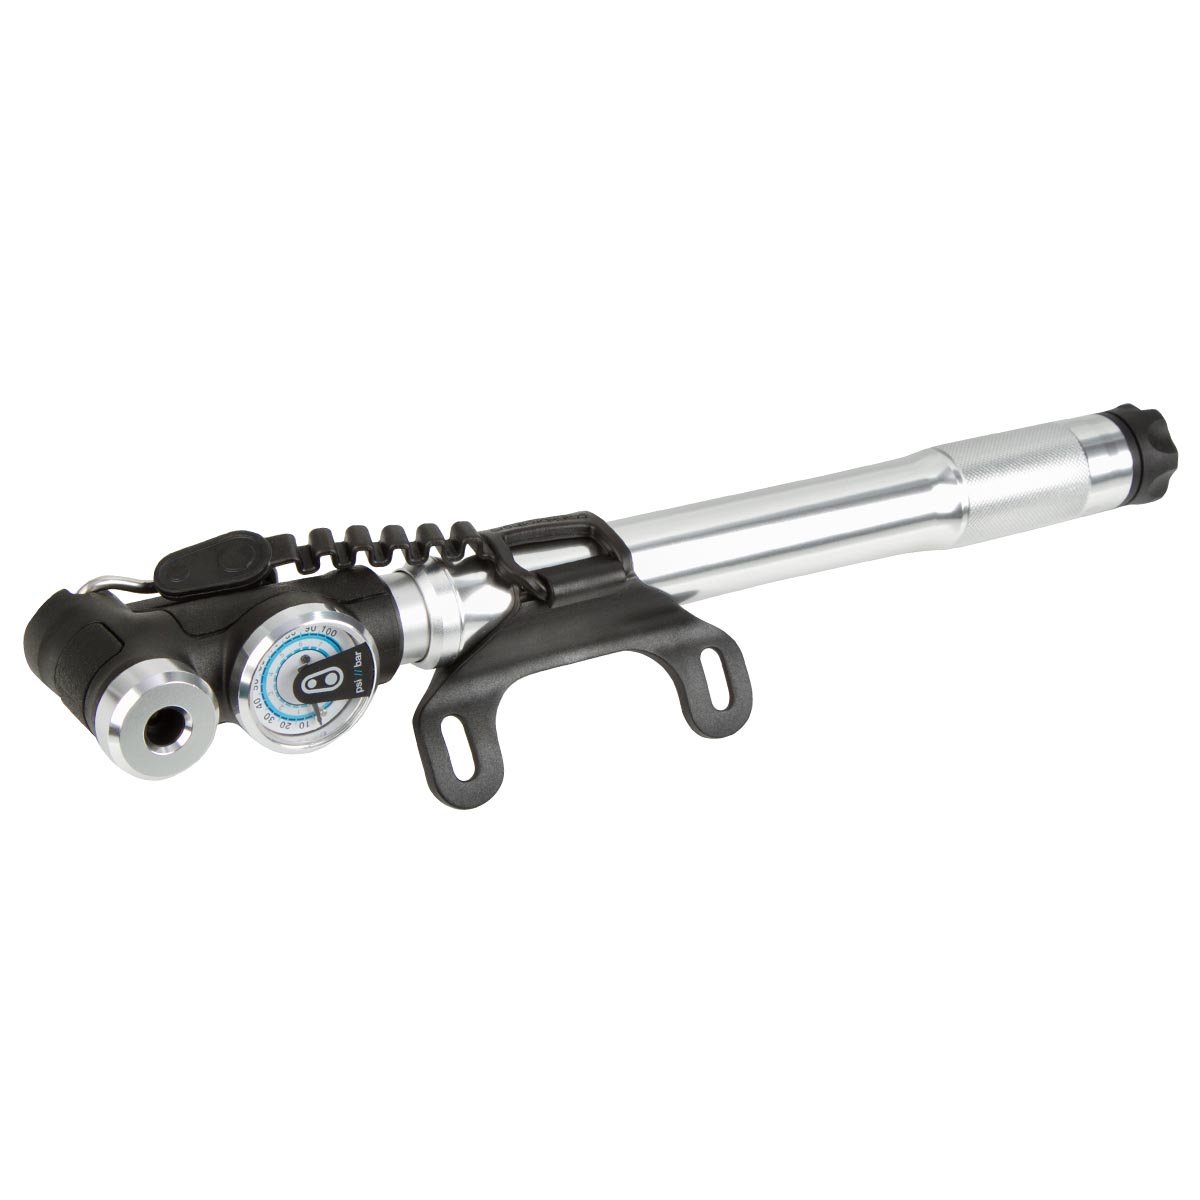 Crankbrothers Pompa a Mano Sterling LG analog manometer, incl. frame mounting, Silver